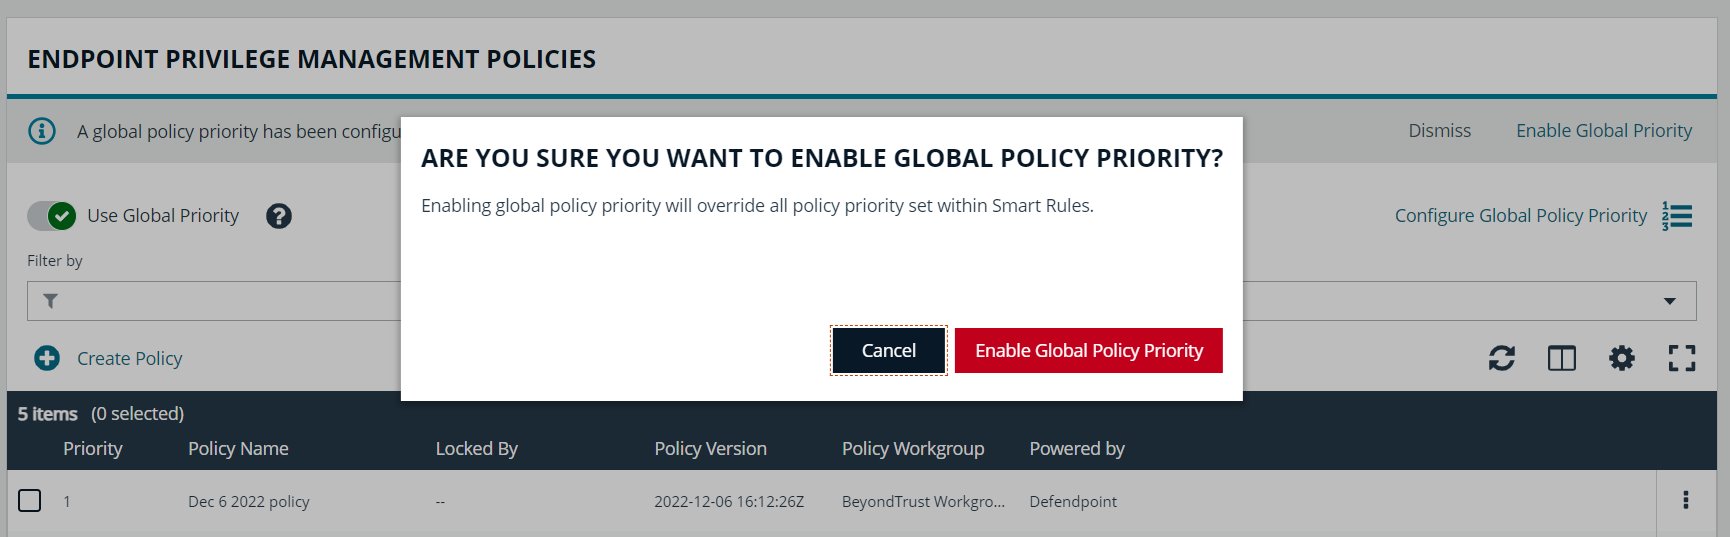 Confirmation message asking to confirmation that you want to enable global policy priority.